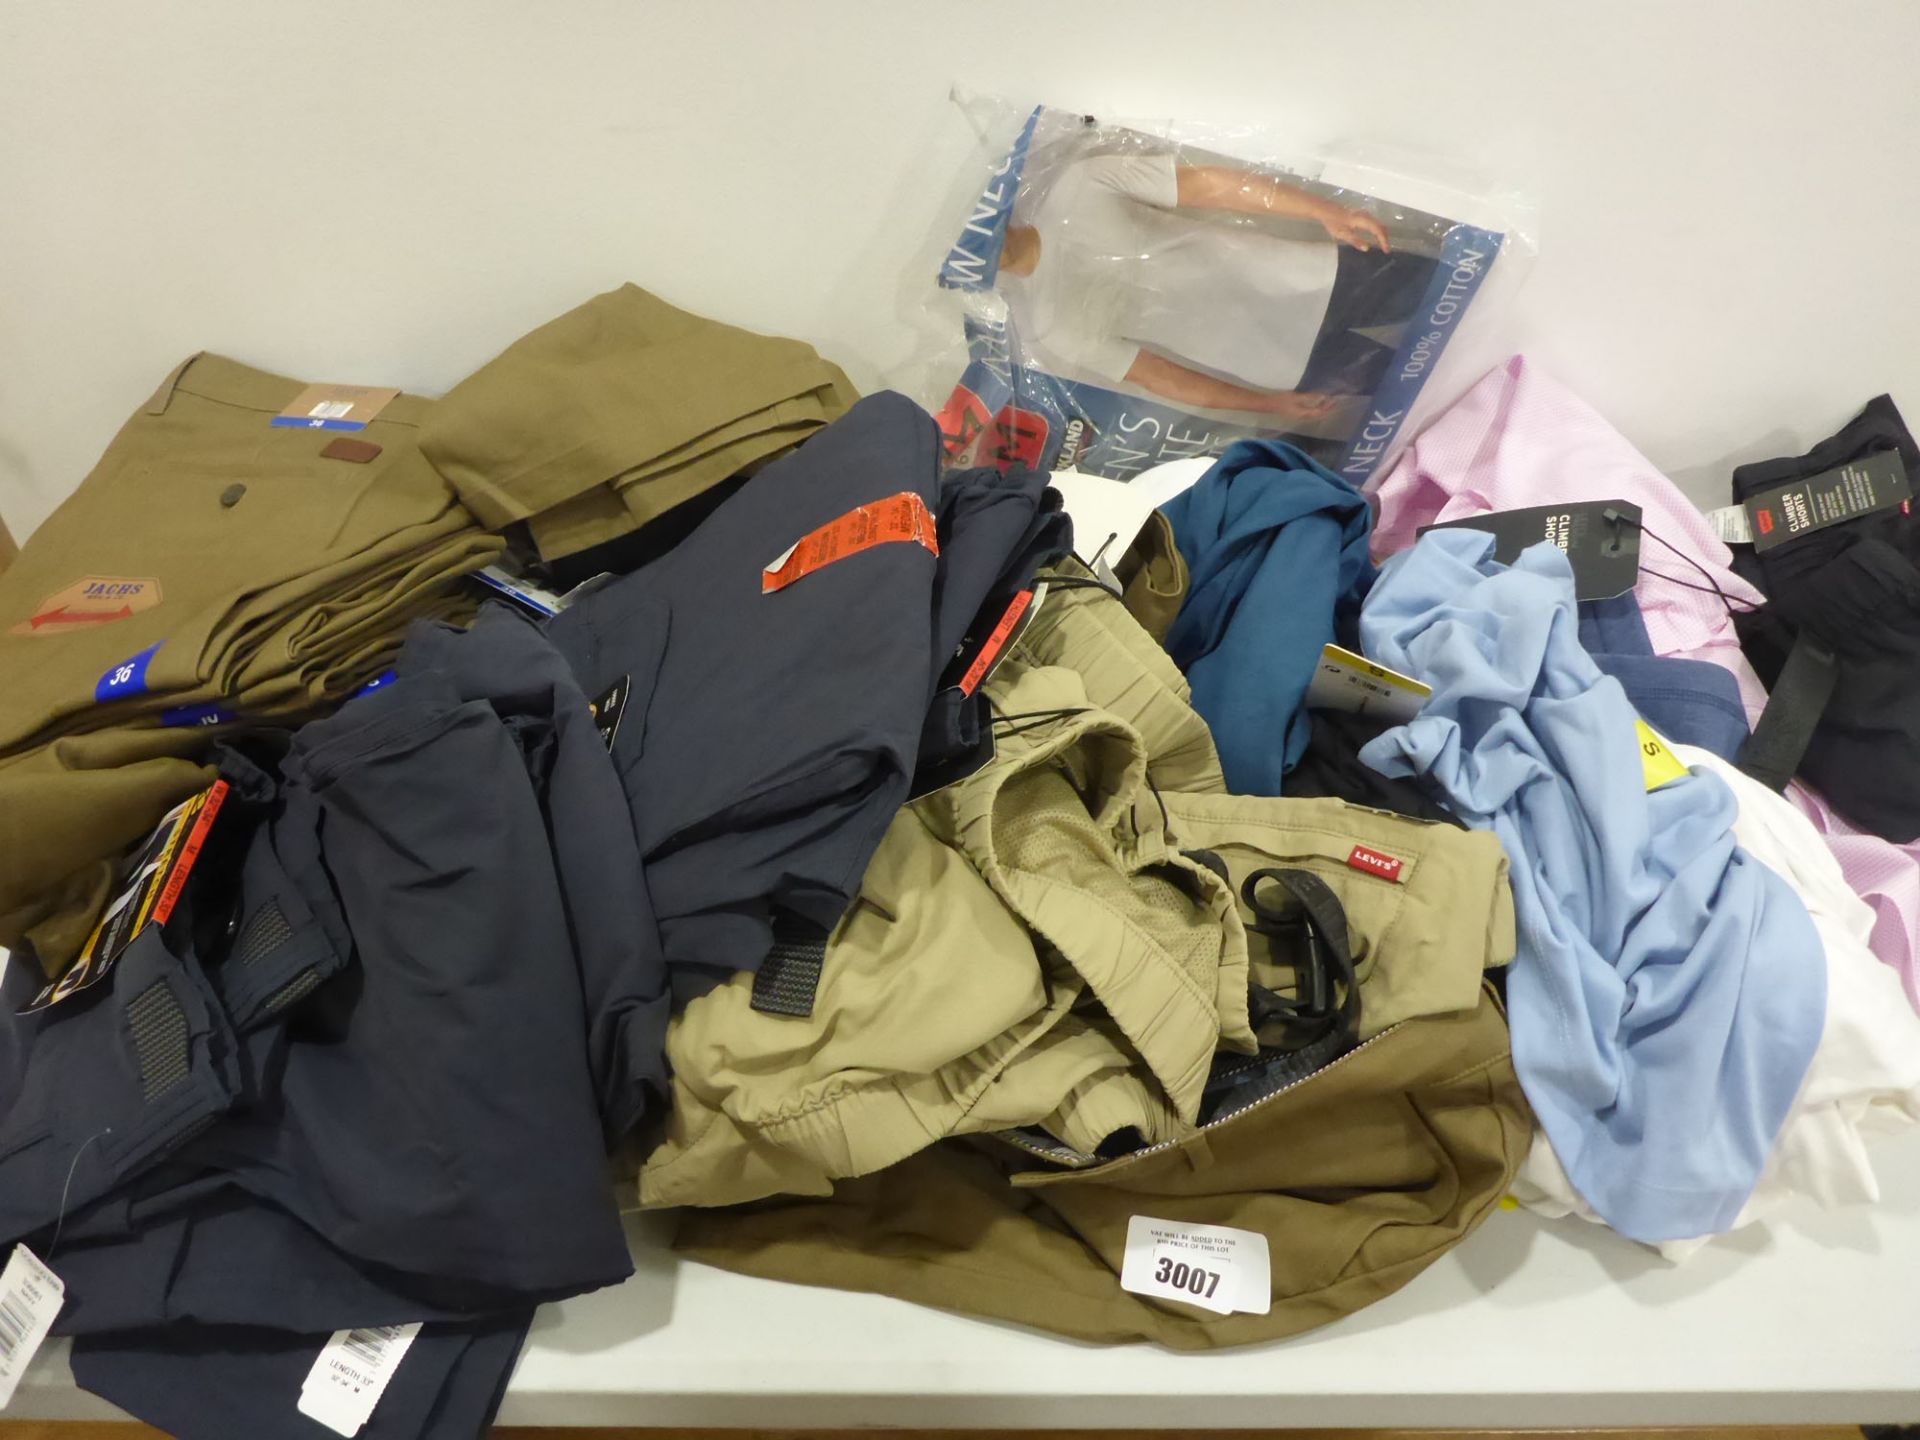 Bag containing men's clothing, including trousers, shorts, shirts etc